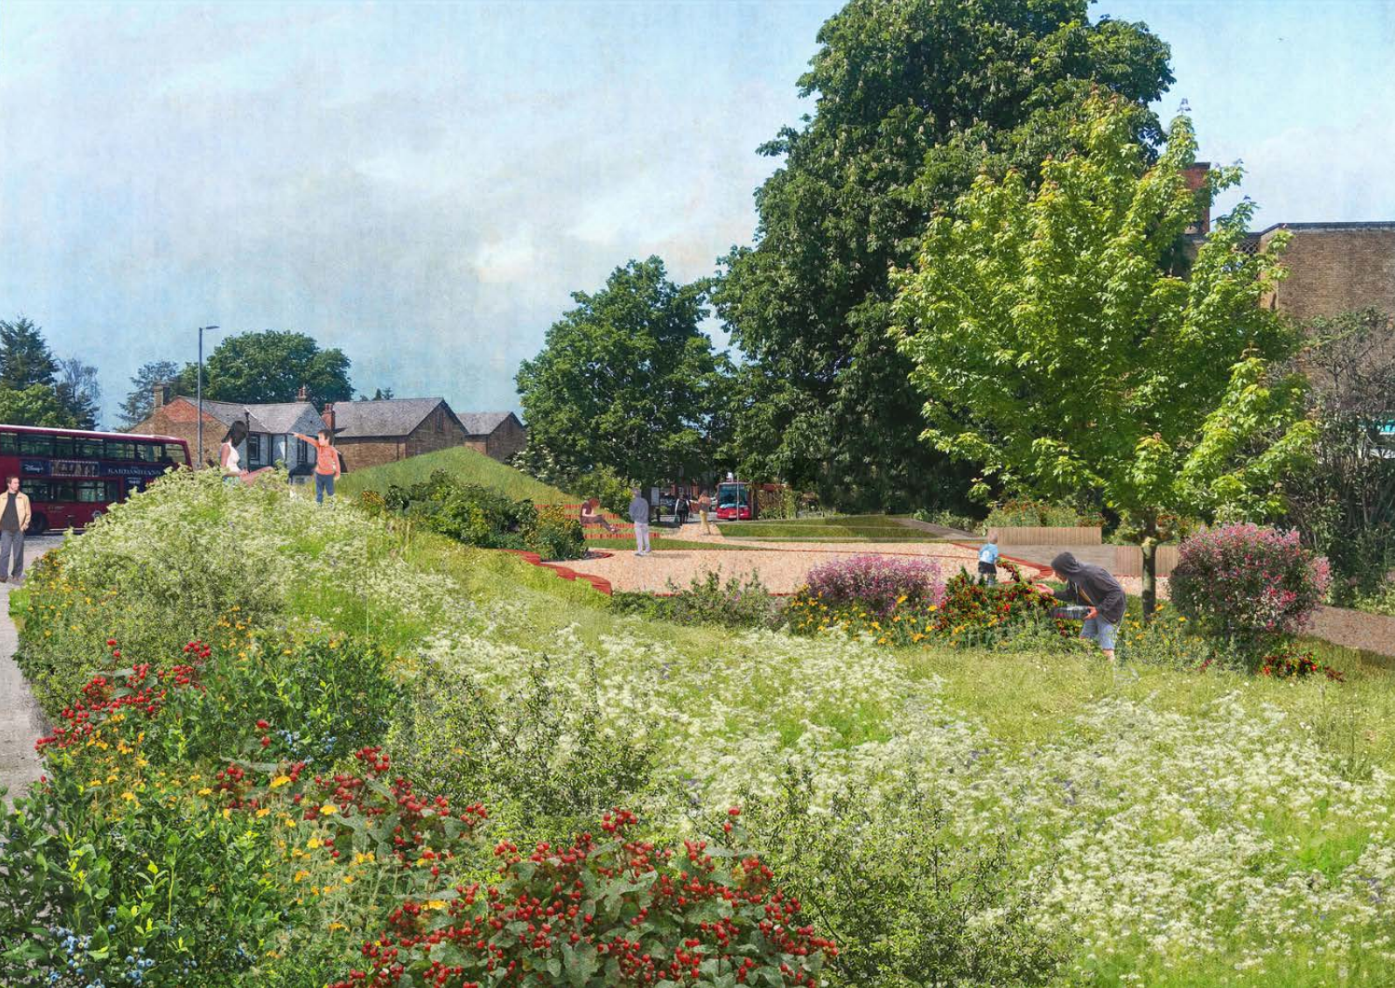 Image showing flowers and grass with trees in the background, with people dotted throughout the space.